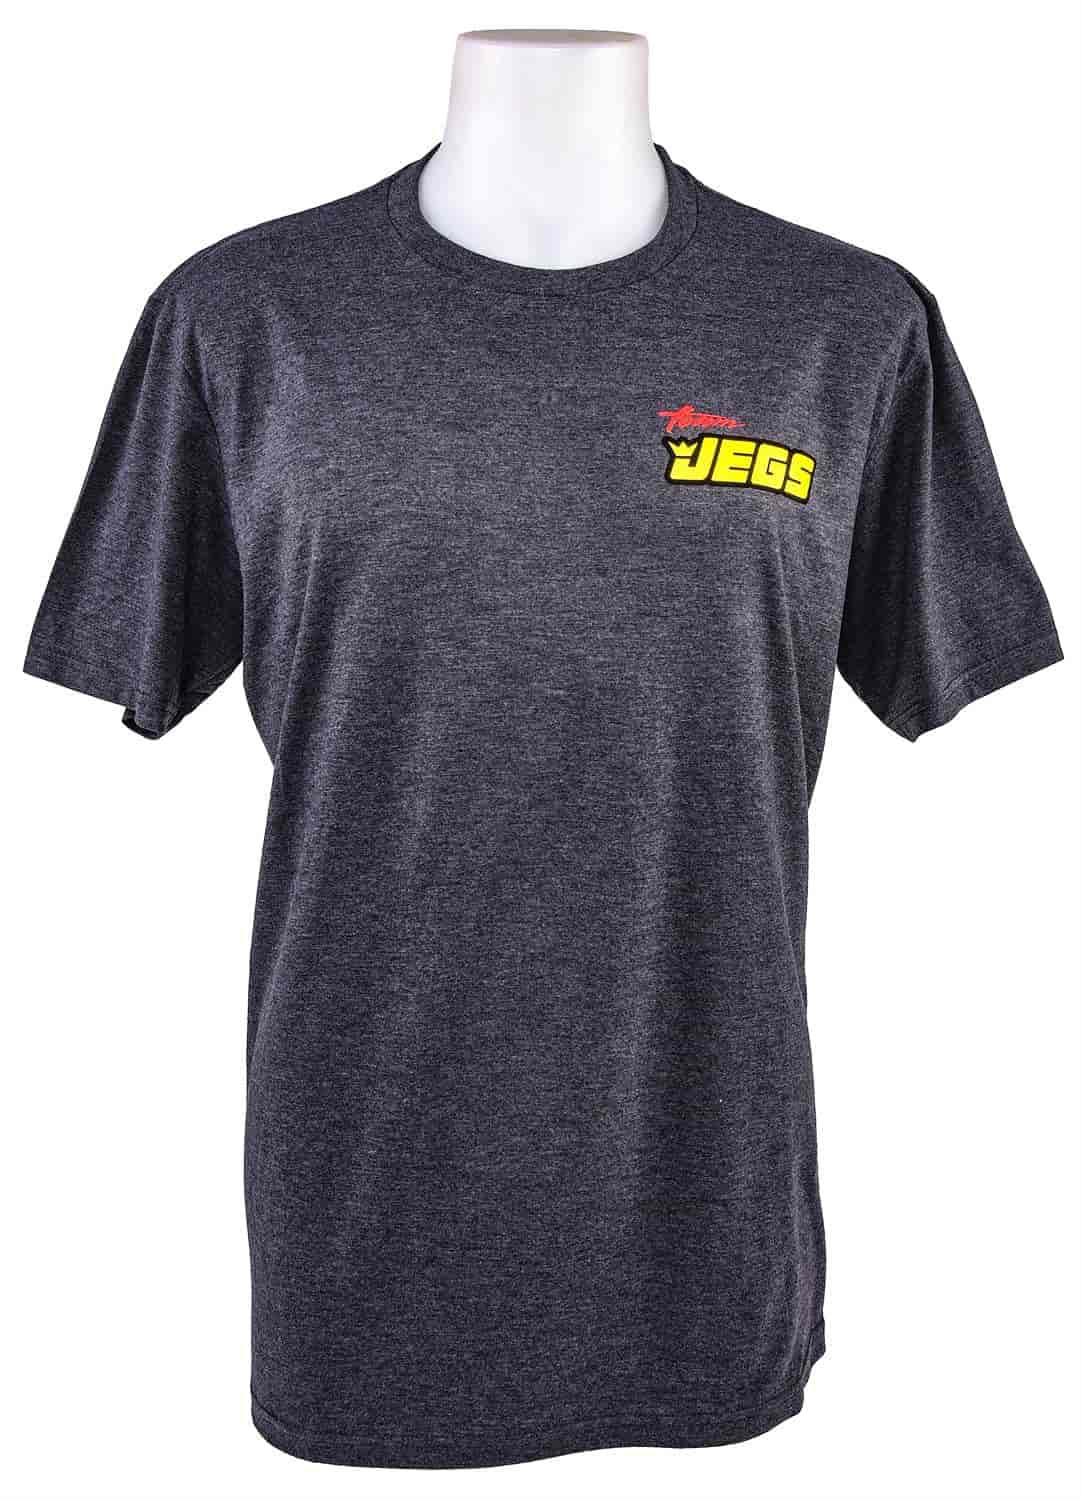 JEGS Stacked Logos T-Shirt